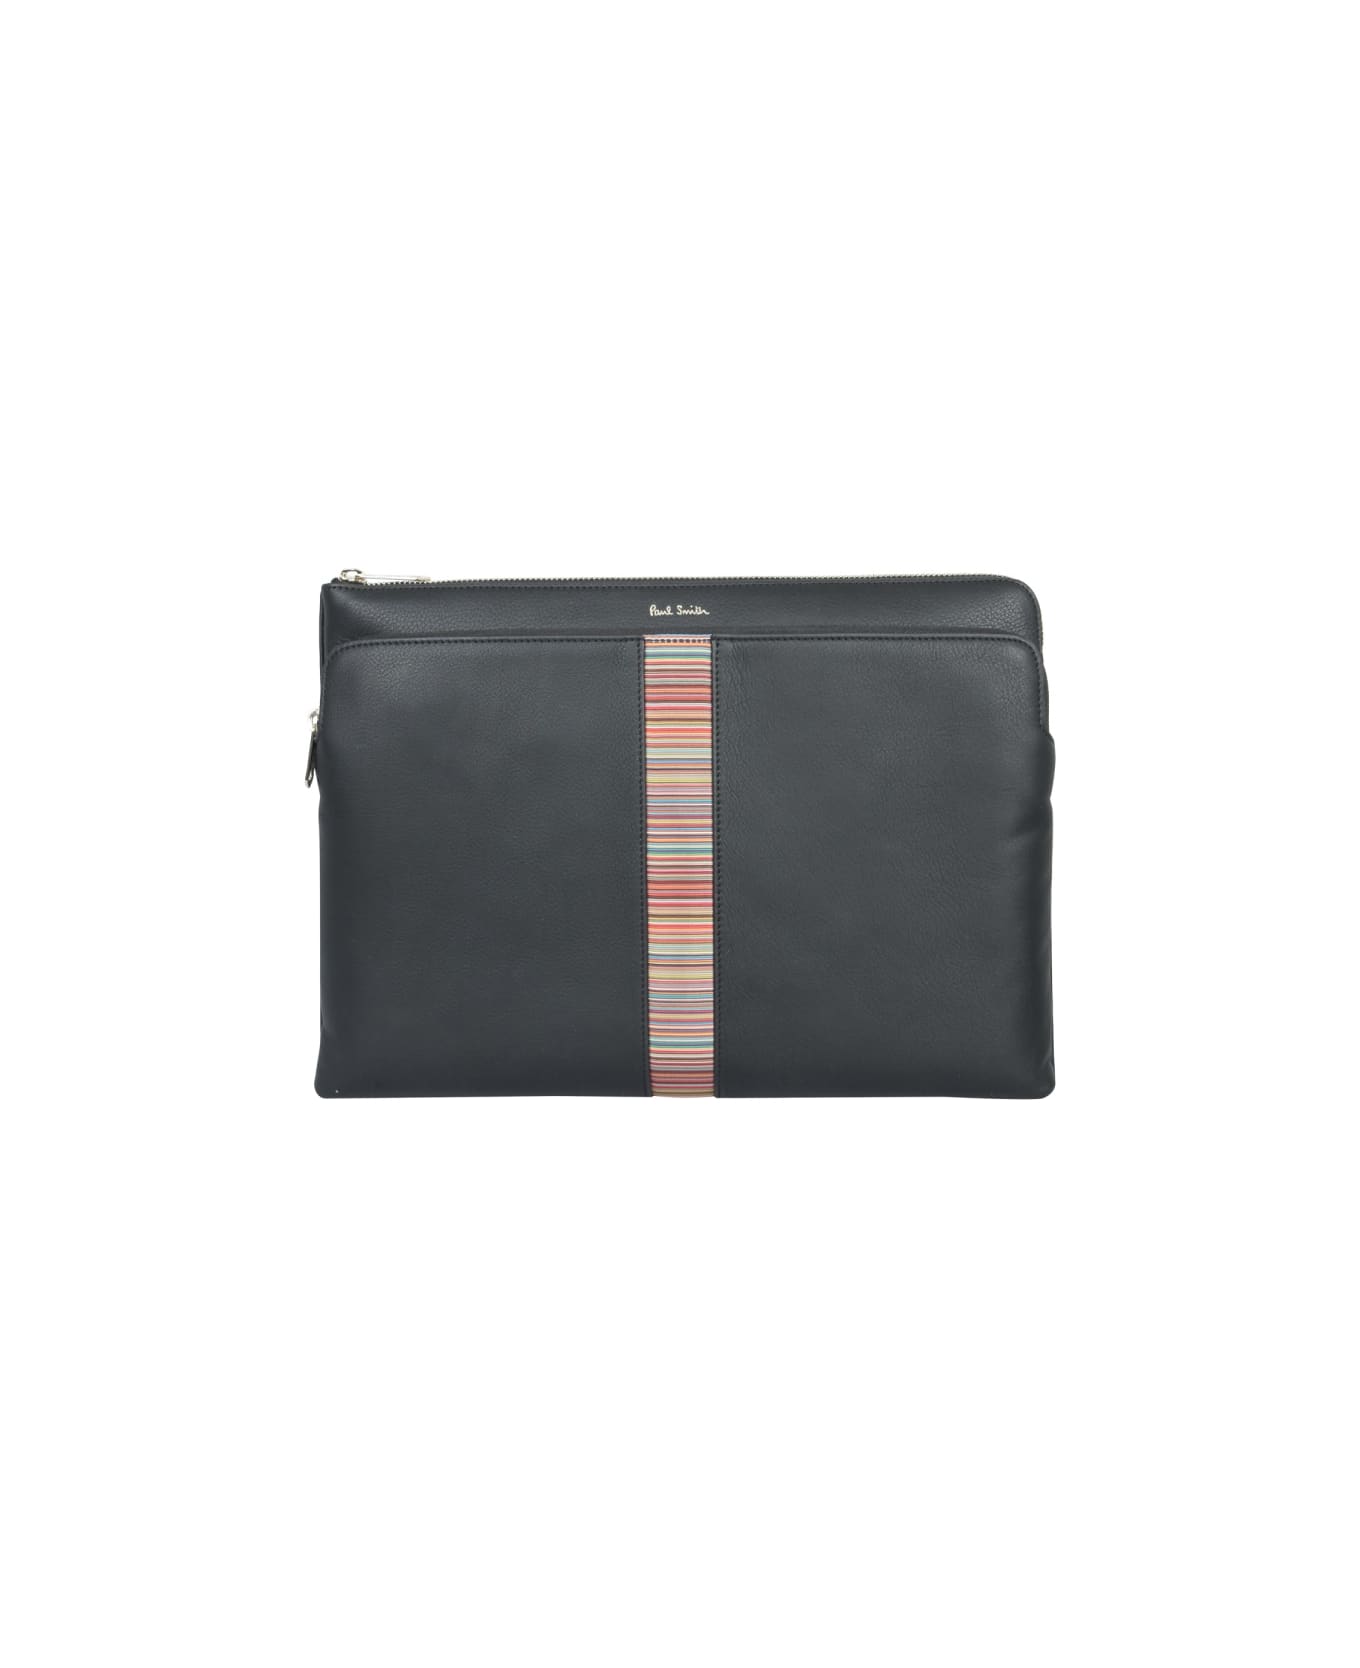 Paul Smith Leather Document Bag - BLACK バッグ